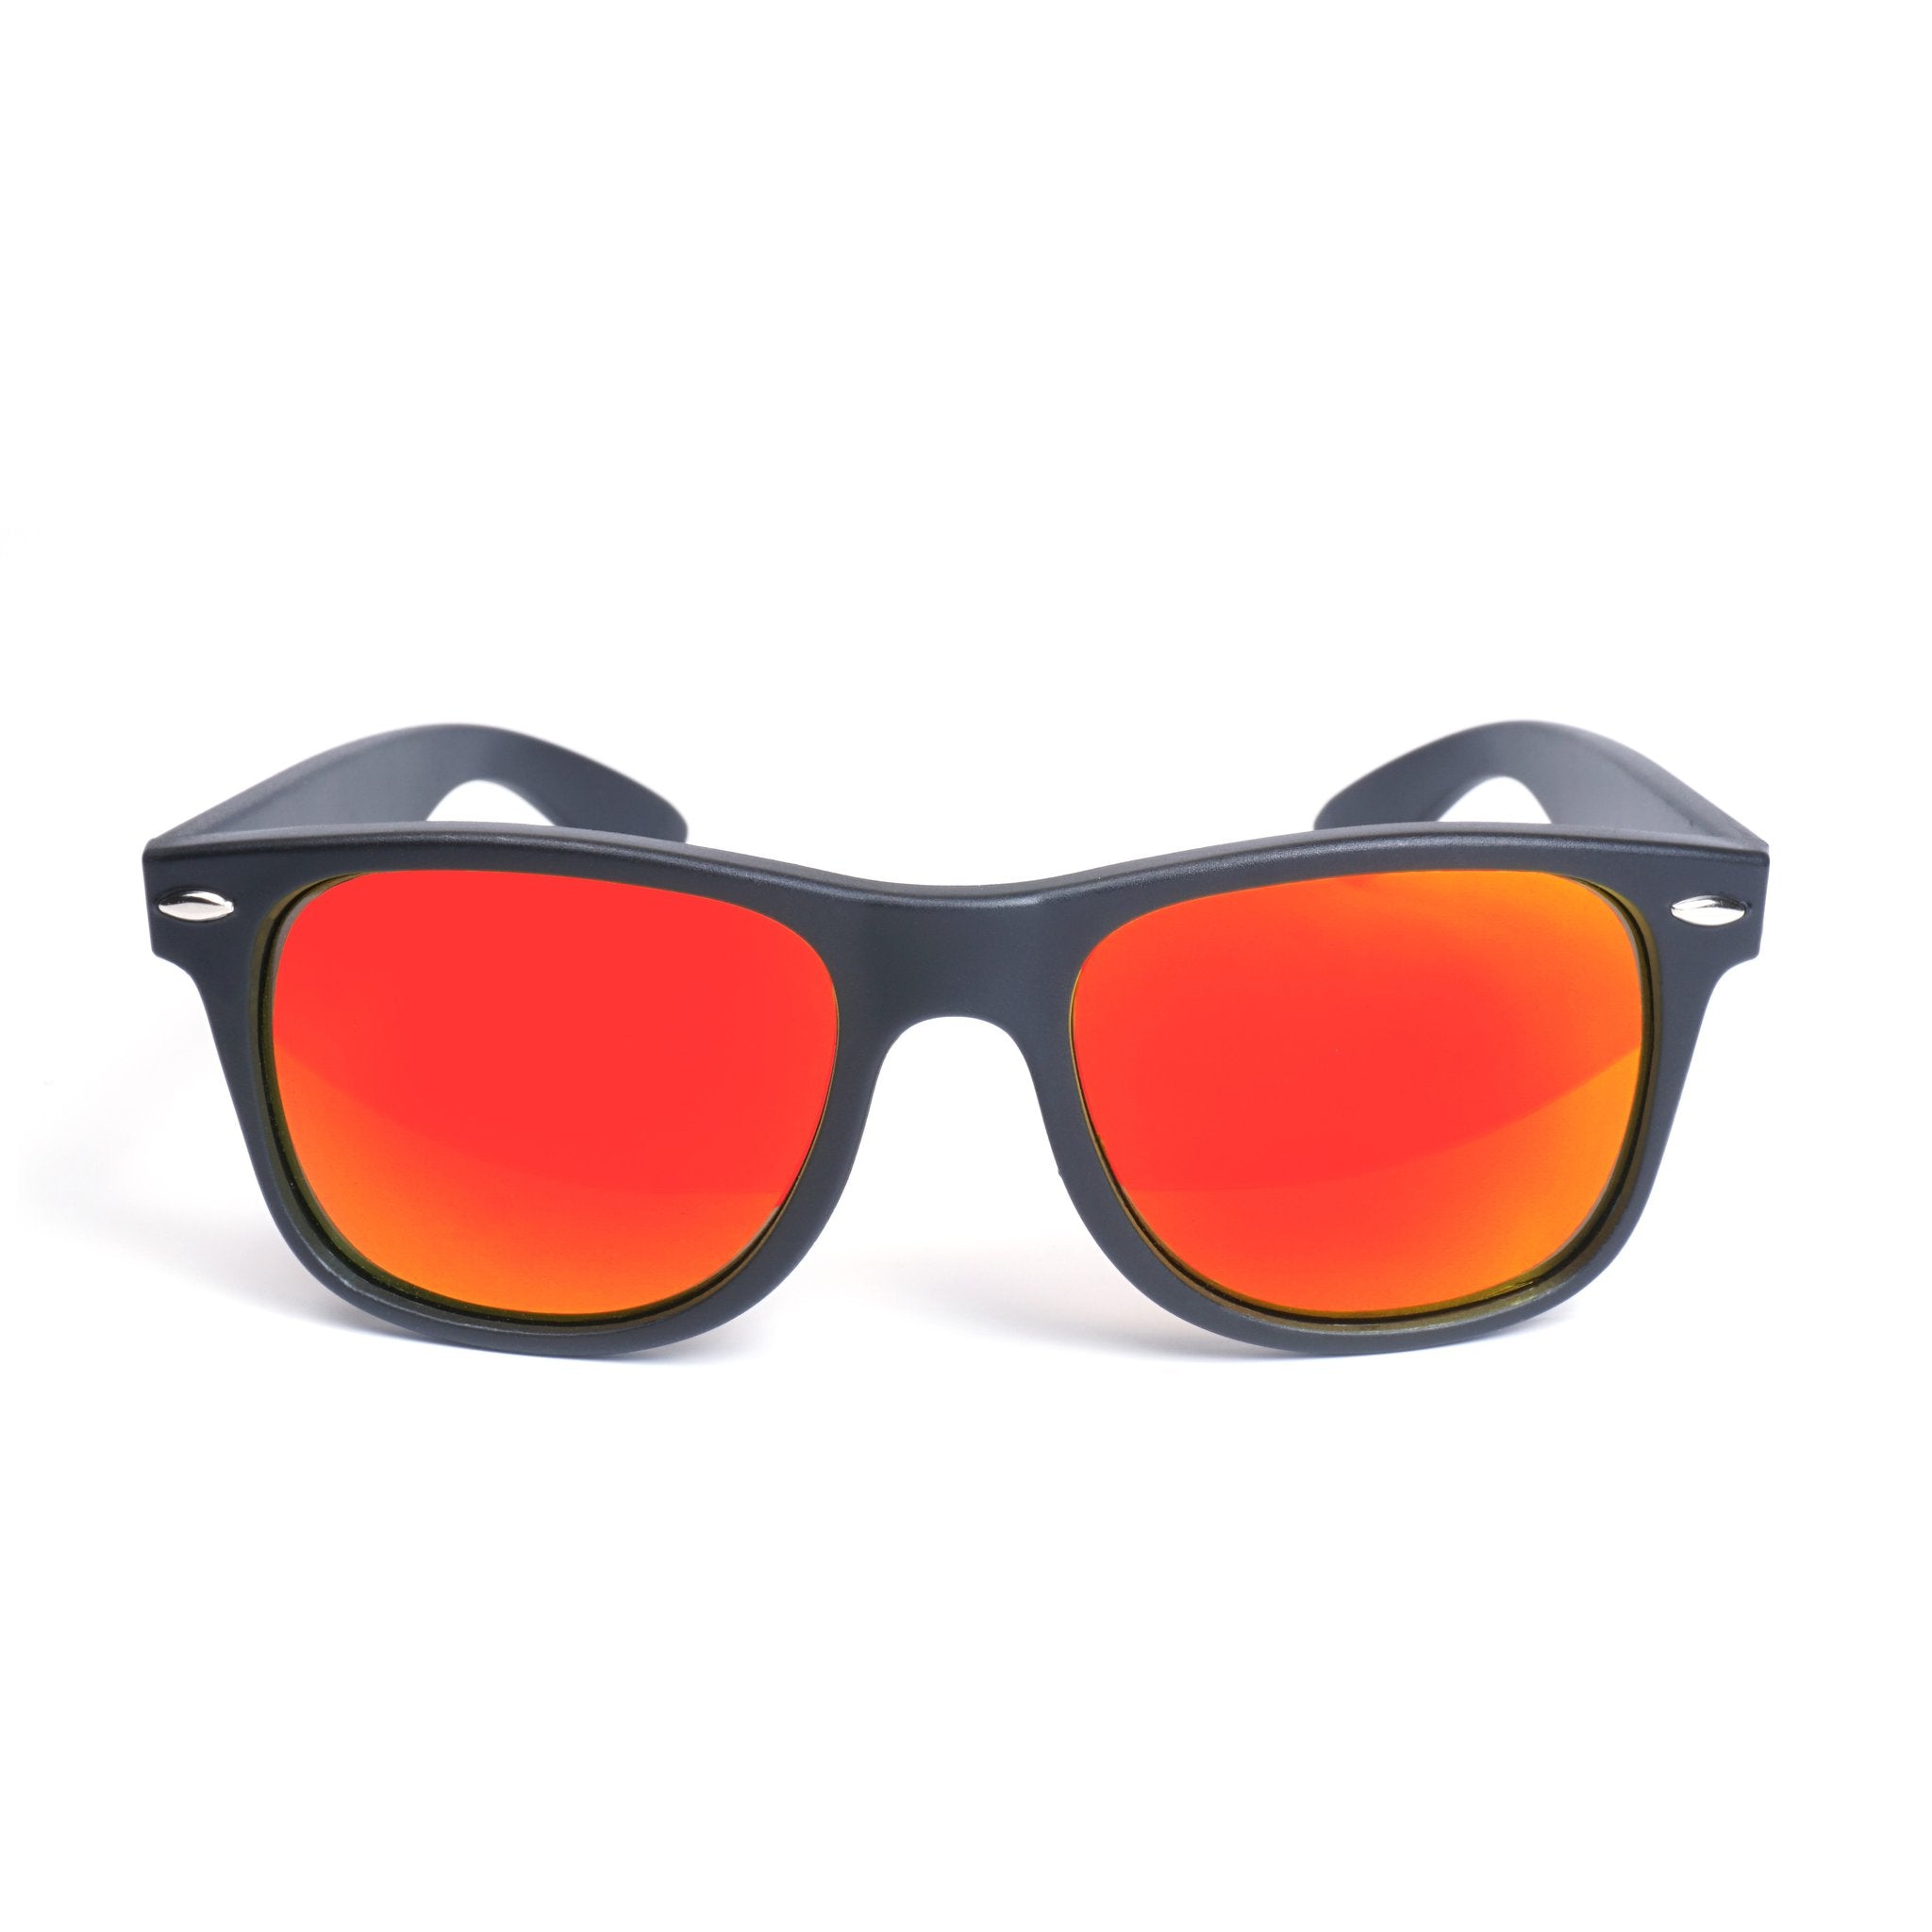 STAGE Rebel Floating Sunglasses feature classic styling, polarized lenses, and floating frames.  Ideal for fishing, boating, SUP, the beach, and other water activities. Poly-carbonate lenses with UV400 protection to filter harmful UVA and UVB Light.  Polarized Lenses reduce reflection and glare.  